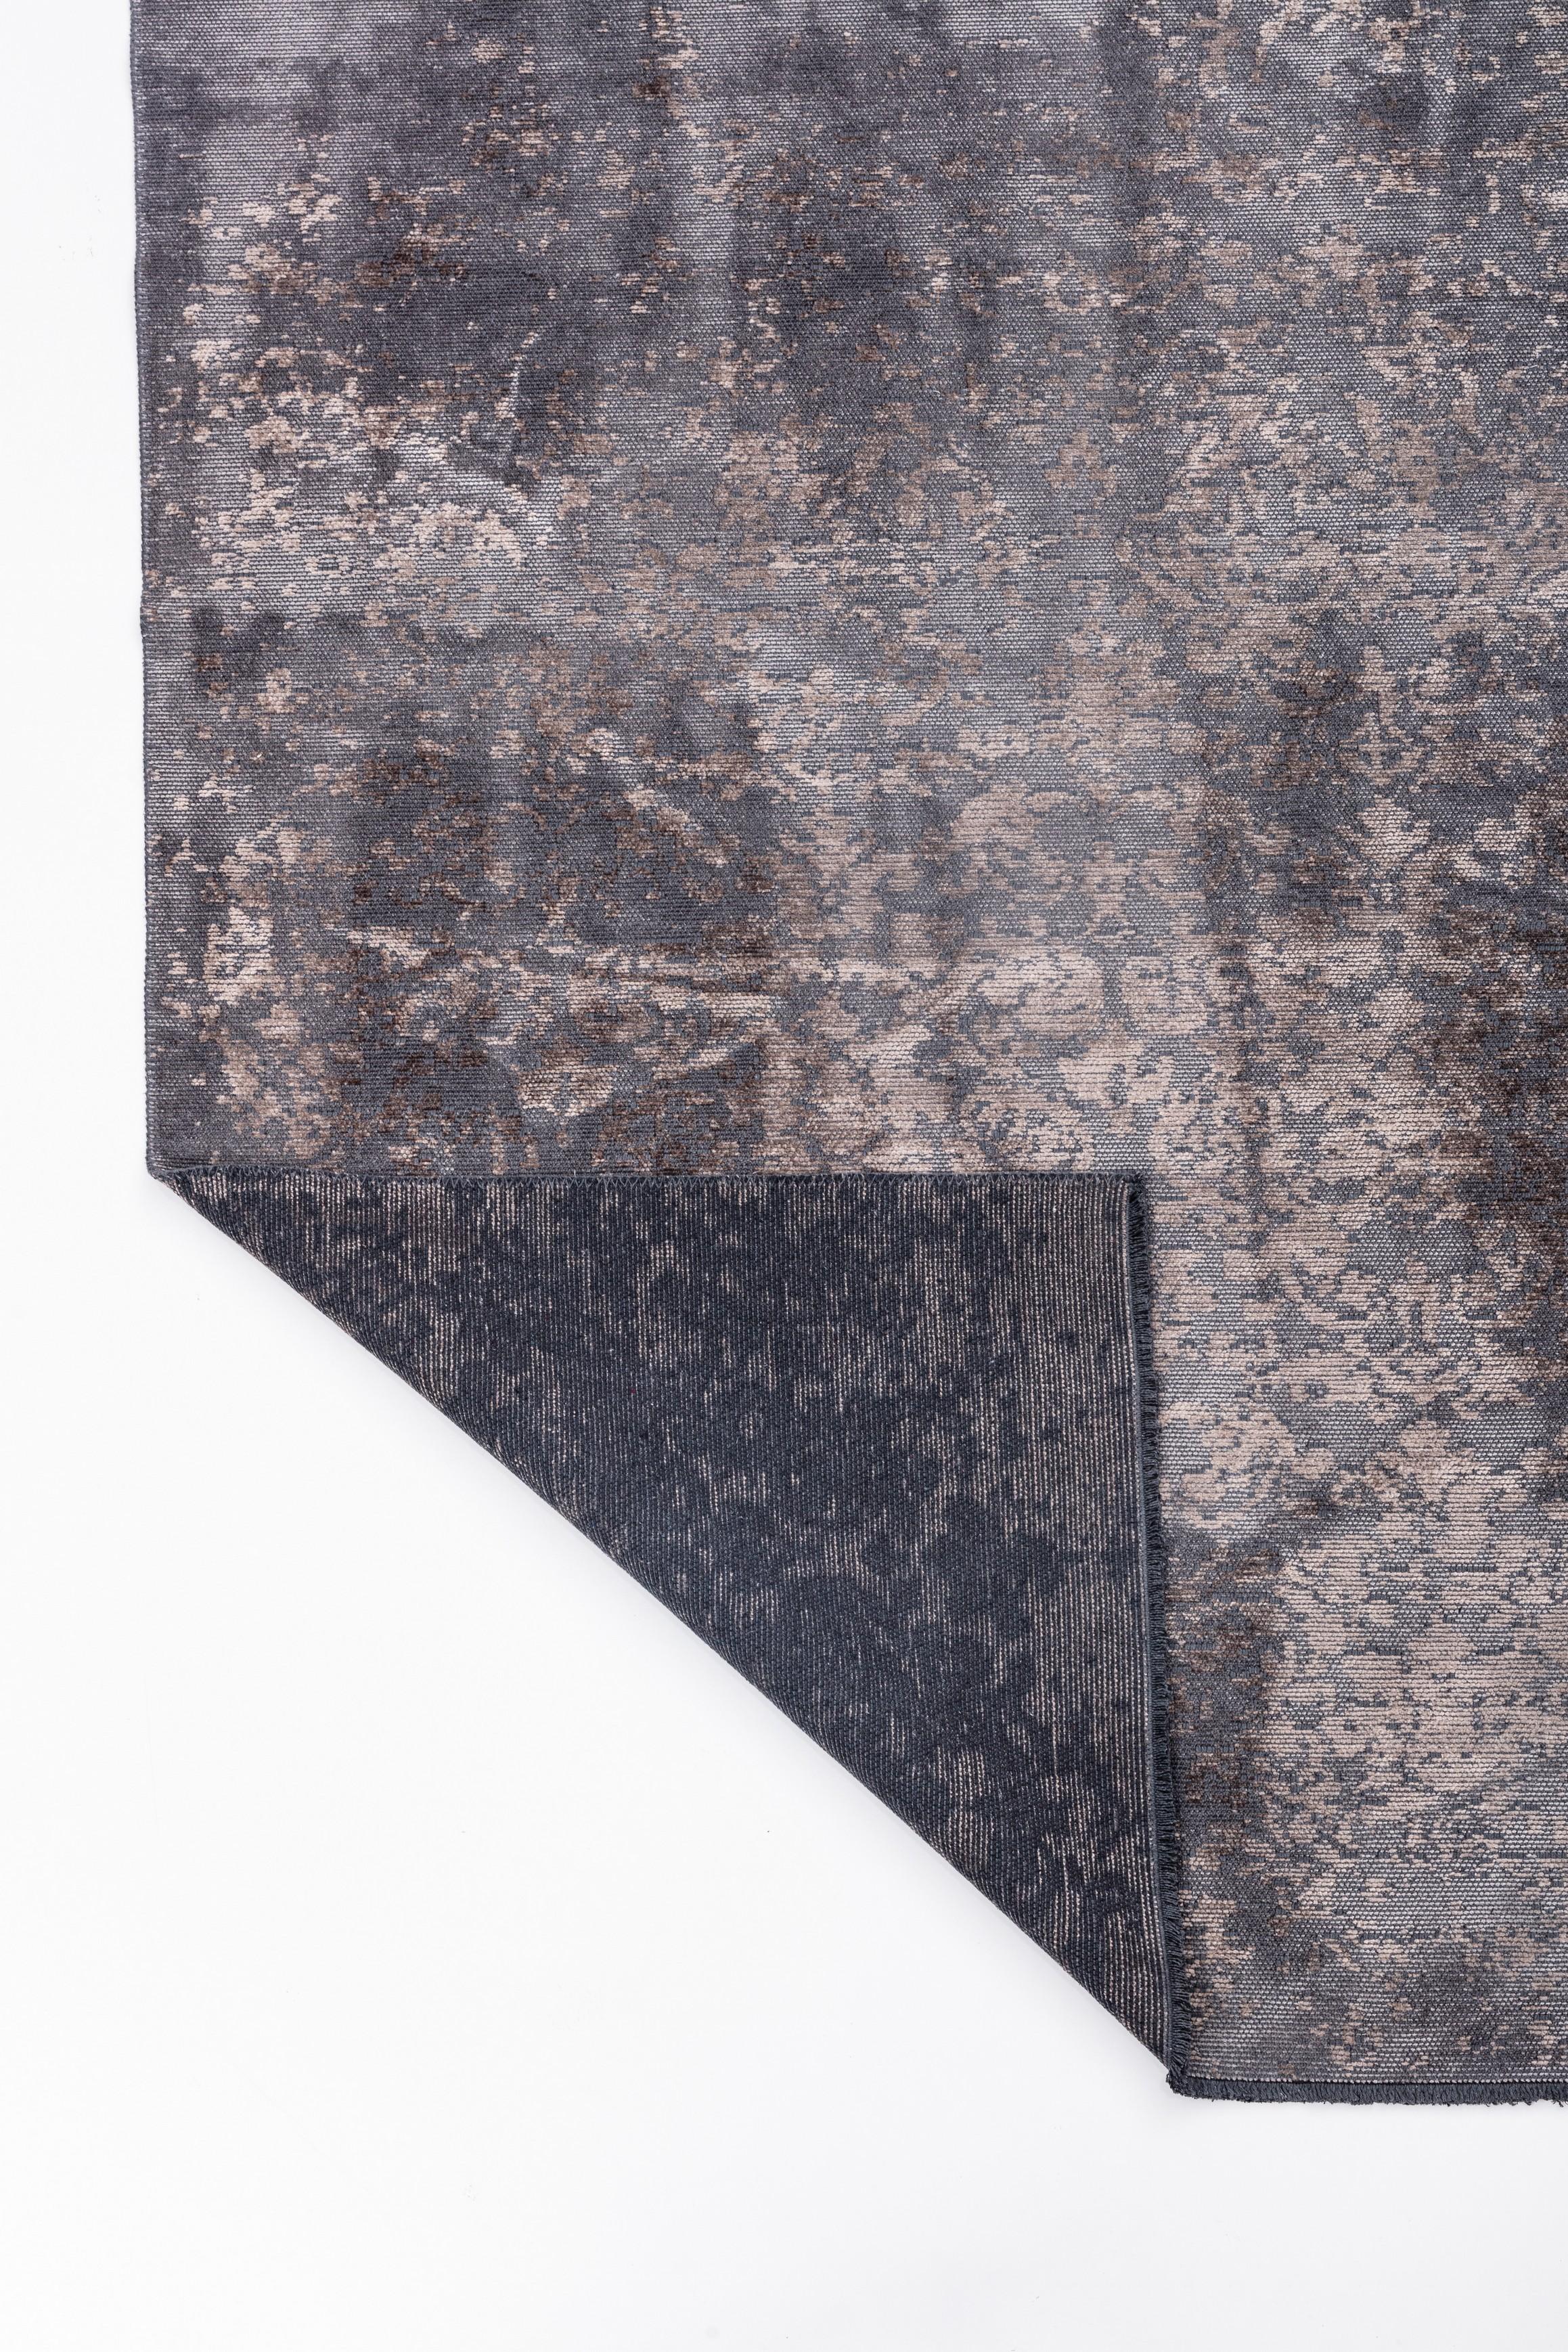 For Sale:  (Gray) Modern  Toile Luxury Area Rug 3